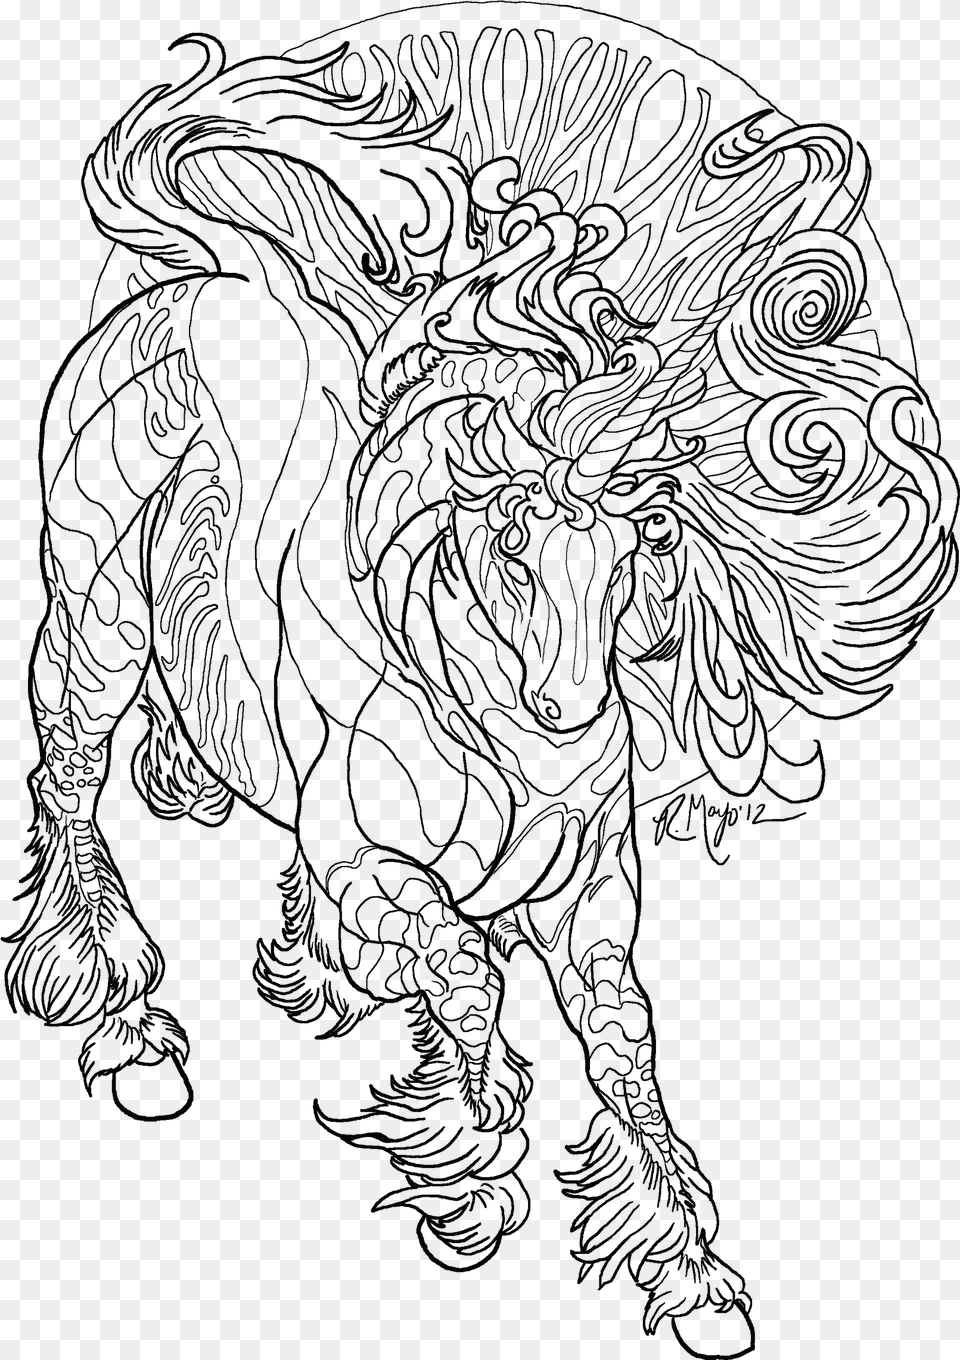 Line Art Coloring Pages Coloring Pages For Adults Unicorn, Silhouette Png Image